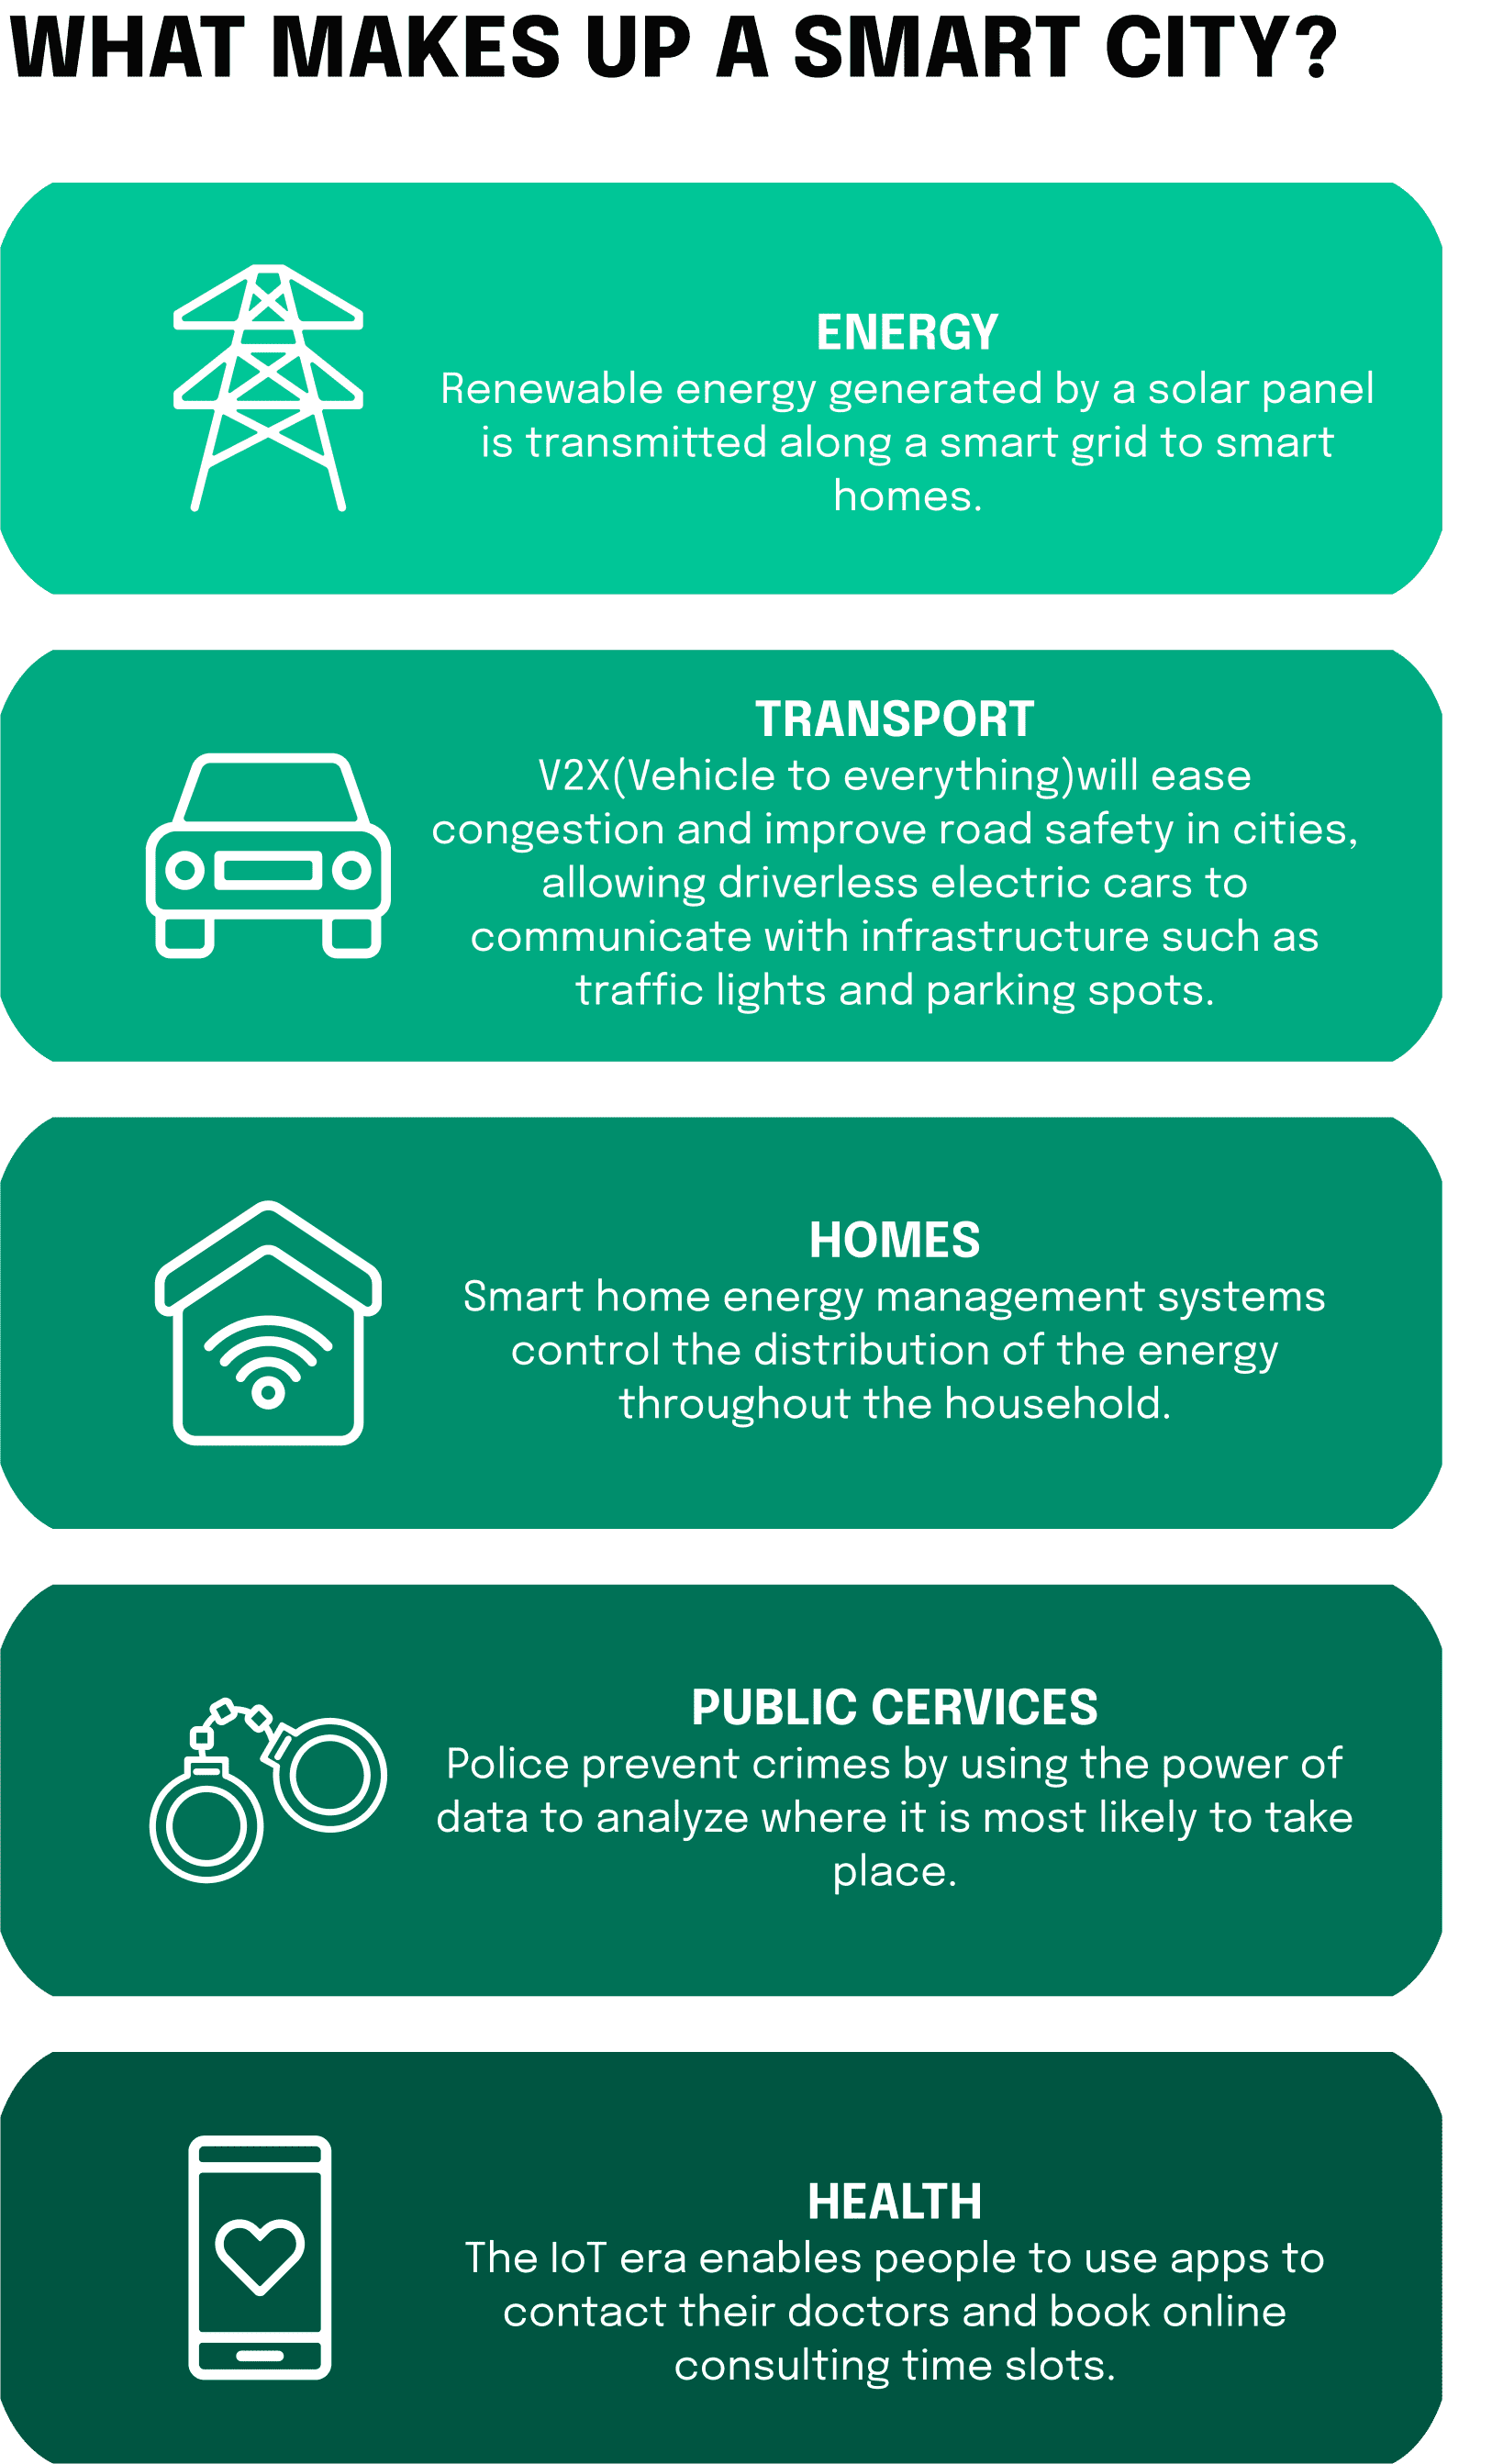 Improved connectivity, enabled by the proliferation of 5G technology, facilitated the implementation of the Internet of Things (IoT), transforming homes, industries and public spaces into intelligent, efficient and responsive environments. This is how smart cities are created.